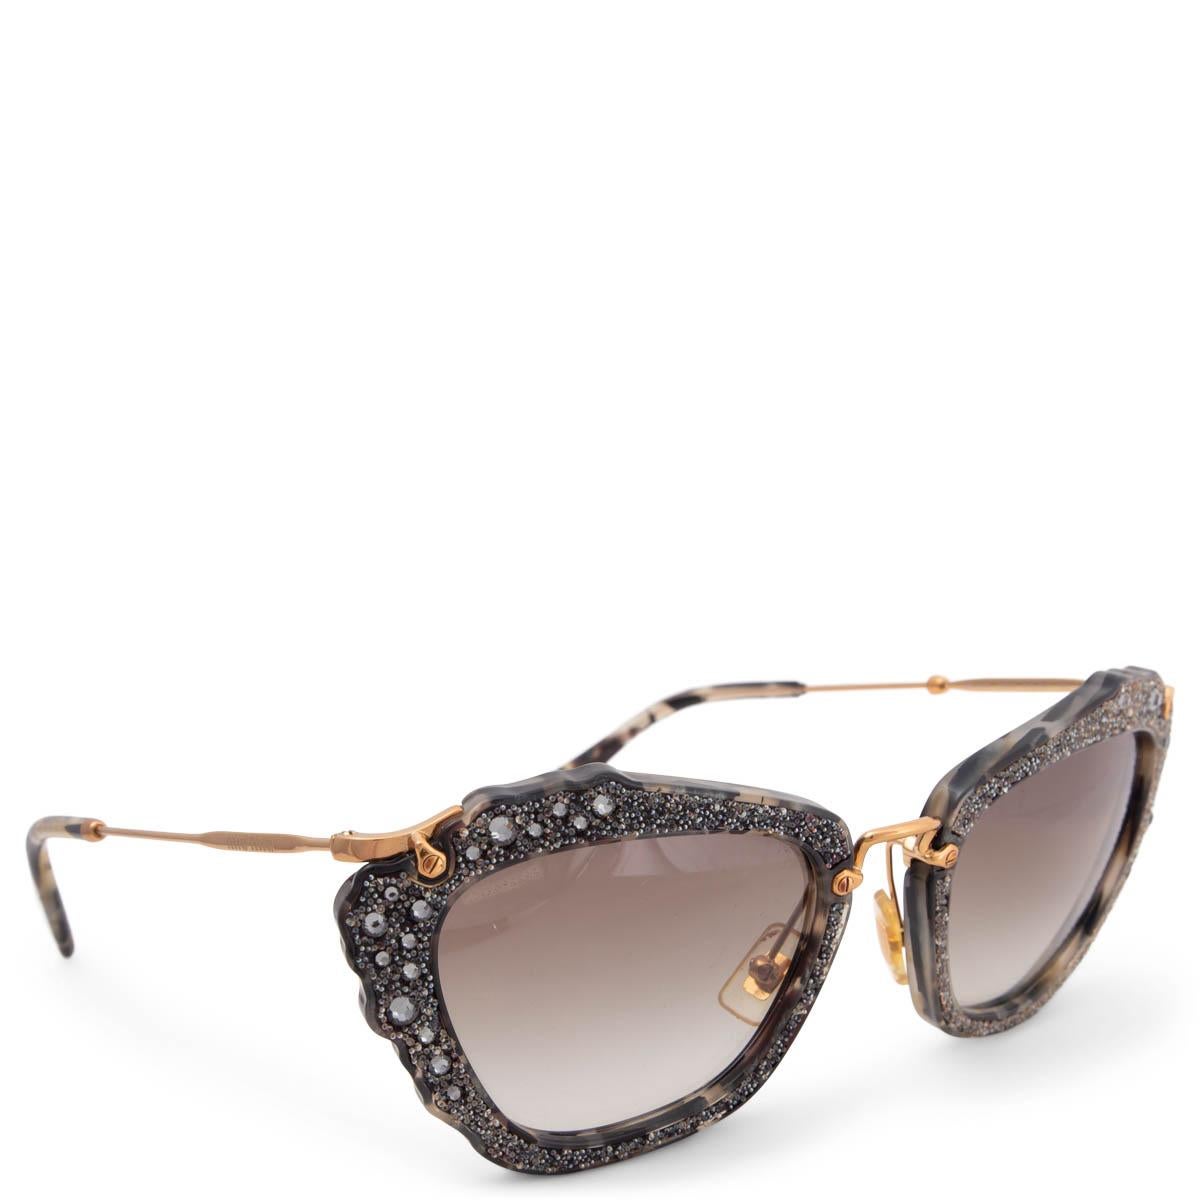 100% authentic Miu Miu SMU04Q cat-eye sunglasses in grey, black and cream tortoise acetate embellished with glitter and rhinestones with grey gradient lenses and gold-tone metal temples. Have been worn and are in excellent condition. Come with case.